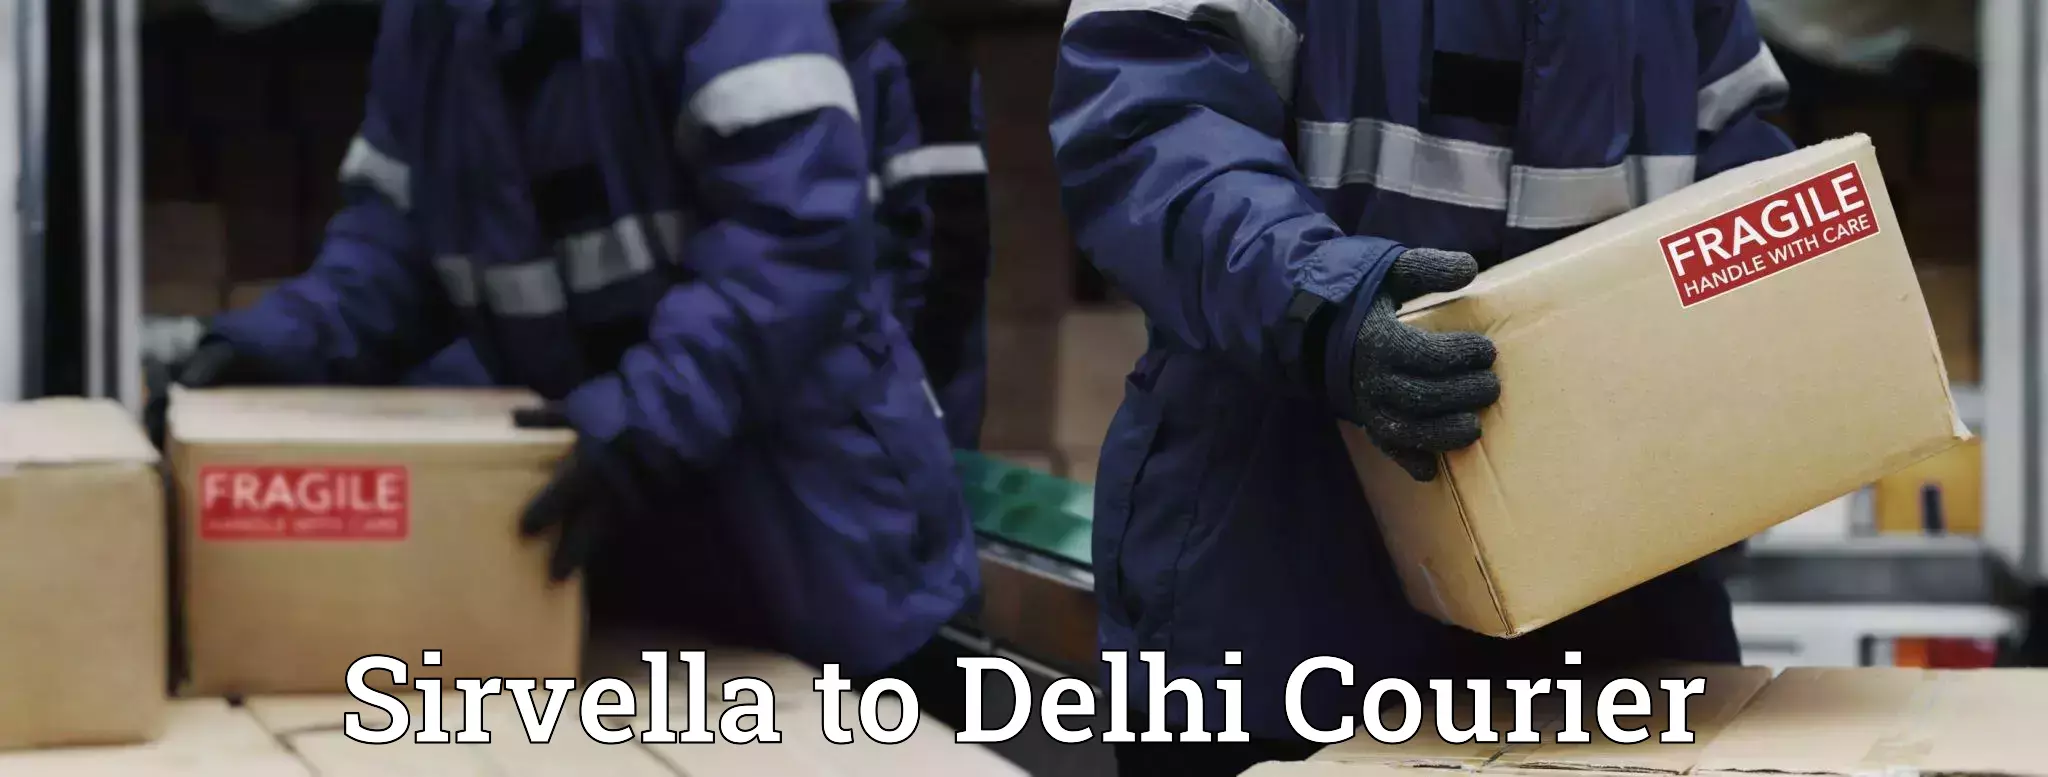 Automated parcel services Sirvella to Delhi